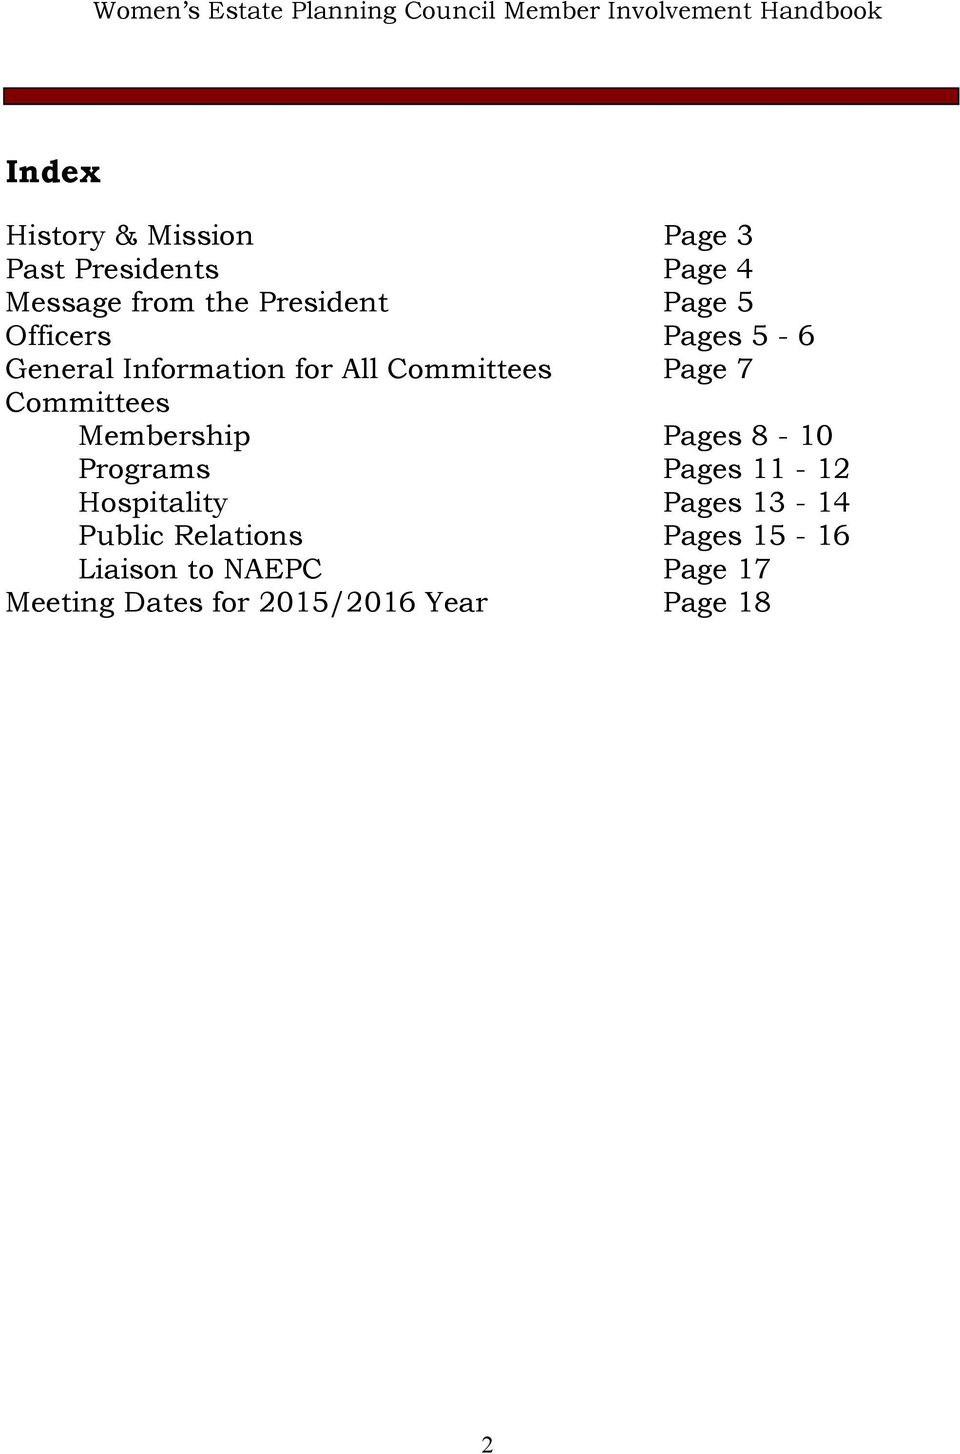 Committees Membership Pages 8-10 Programs Pages 11-12 Hospitality Pages 13-14